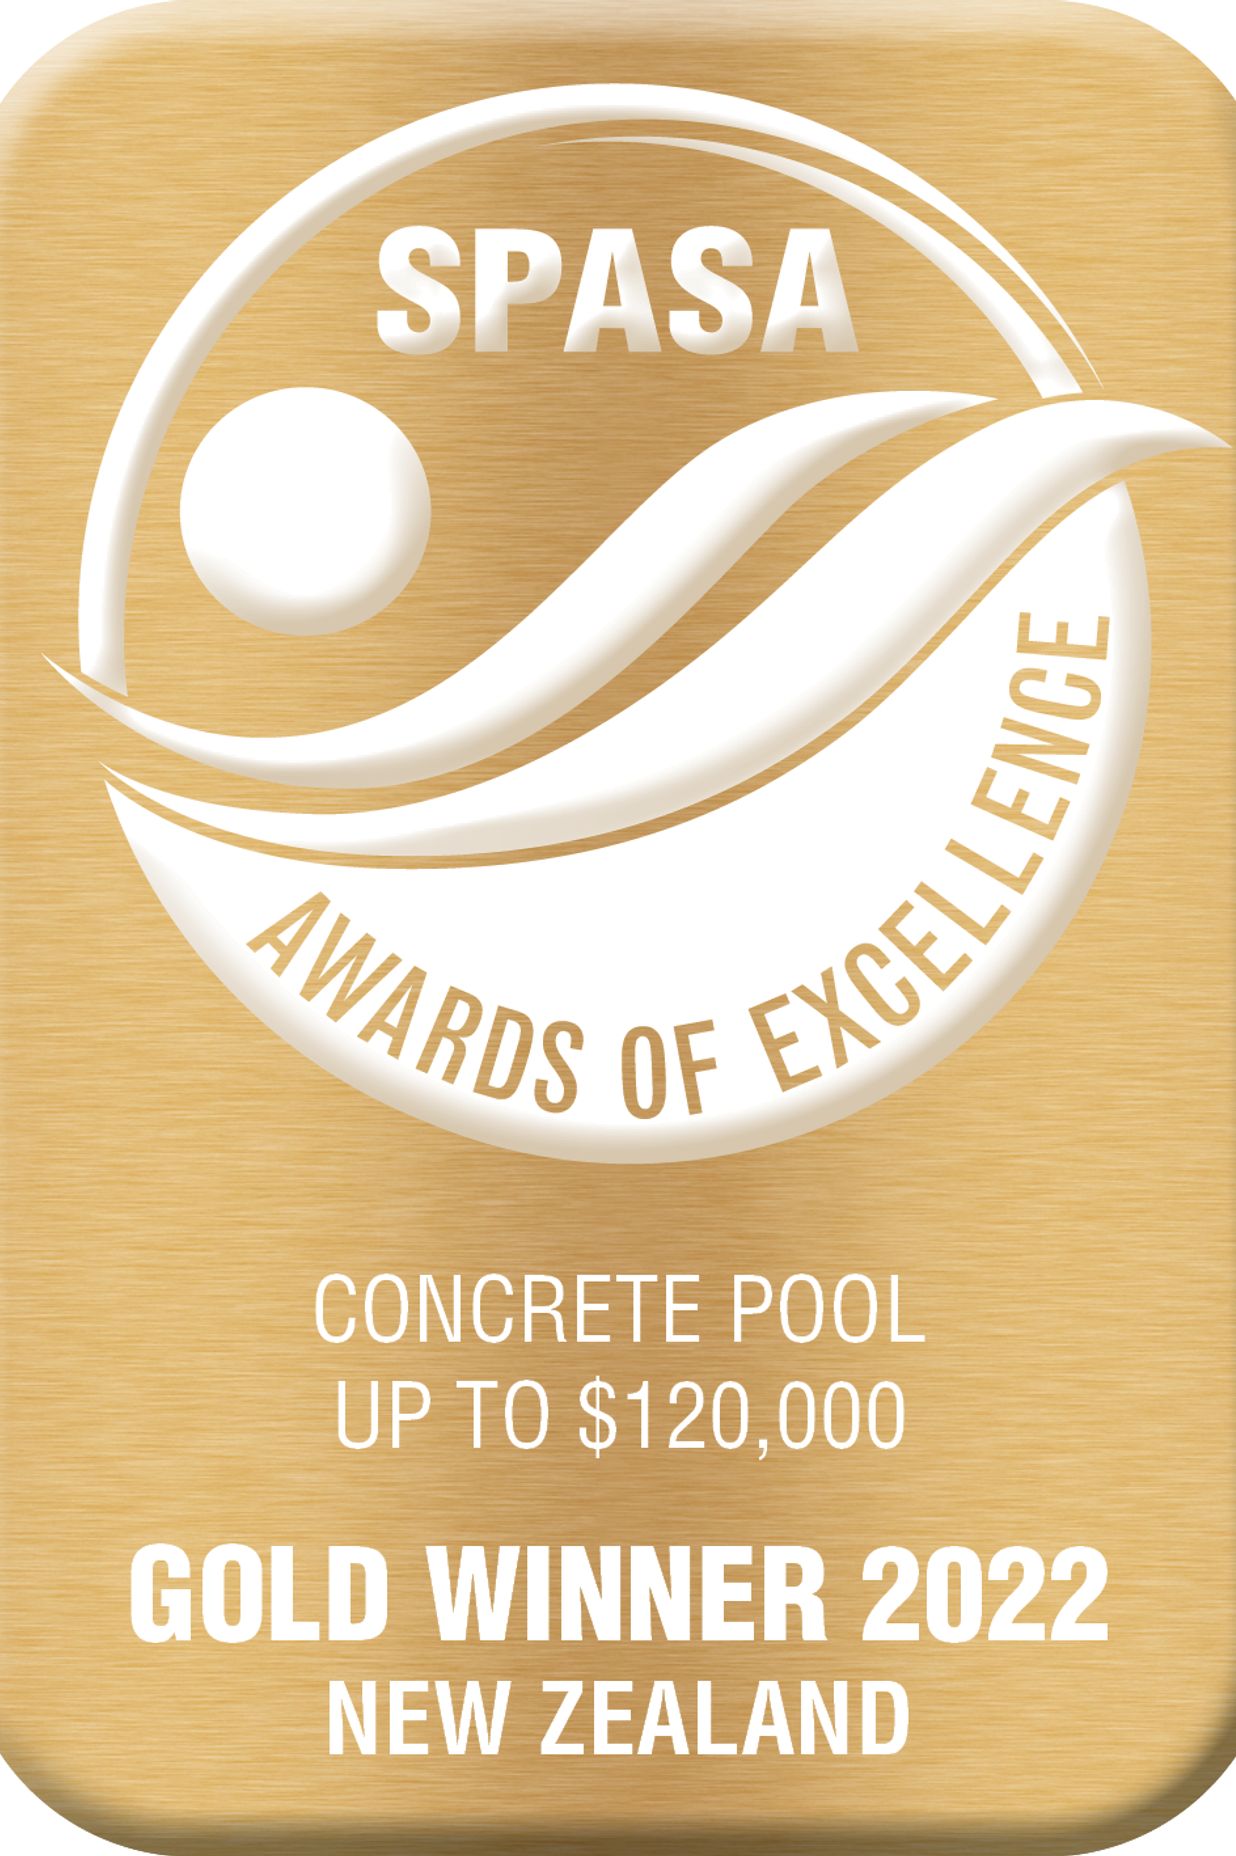 This project received Gold Award at the 2022 SPASA NZ Awards of Excellence